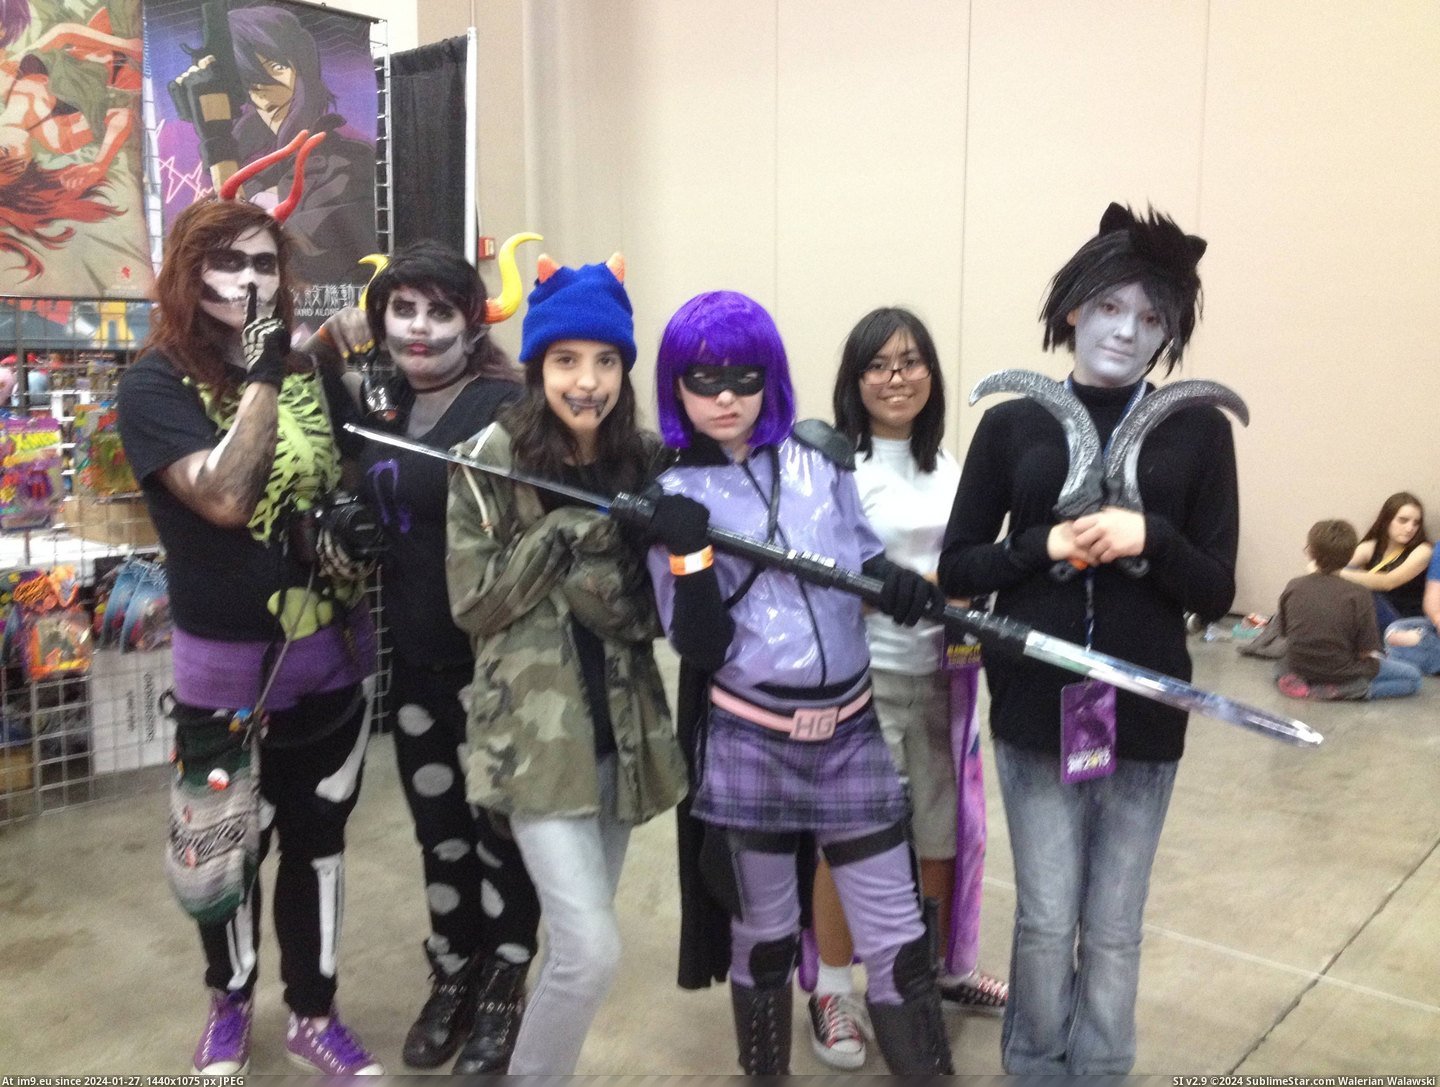 #Girl #Hit #Accc #Cousin #Allowed [Pics] Make a Wish allowed my cousin to go to ACCC. Best Hit Girl there. 2 Pic. (Image of album My r/PICS favs))